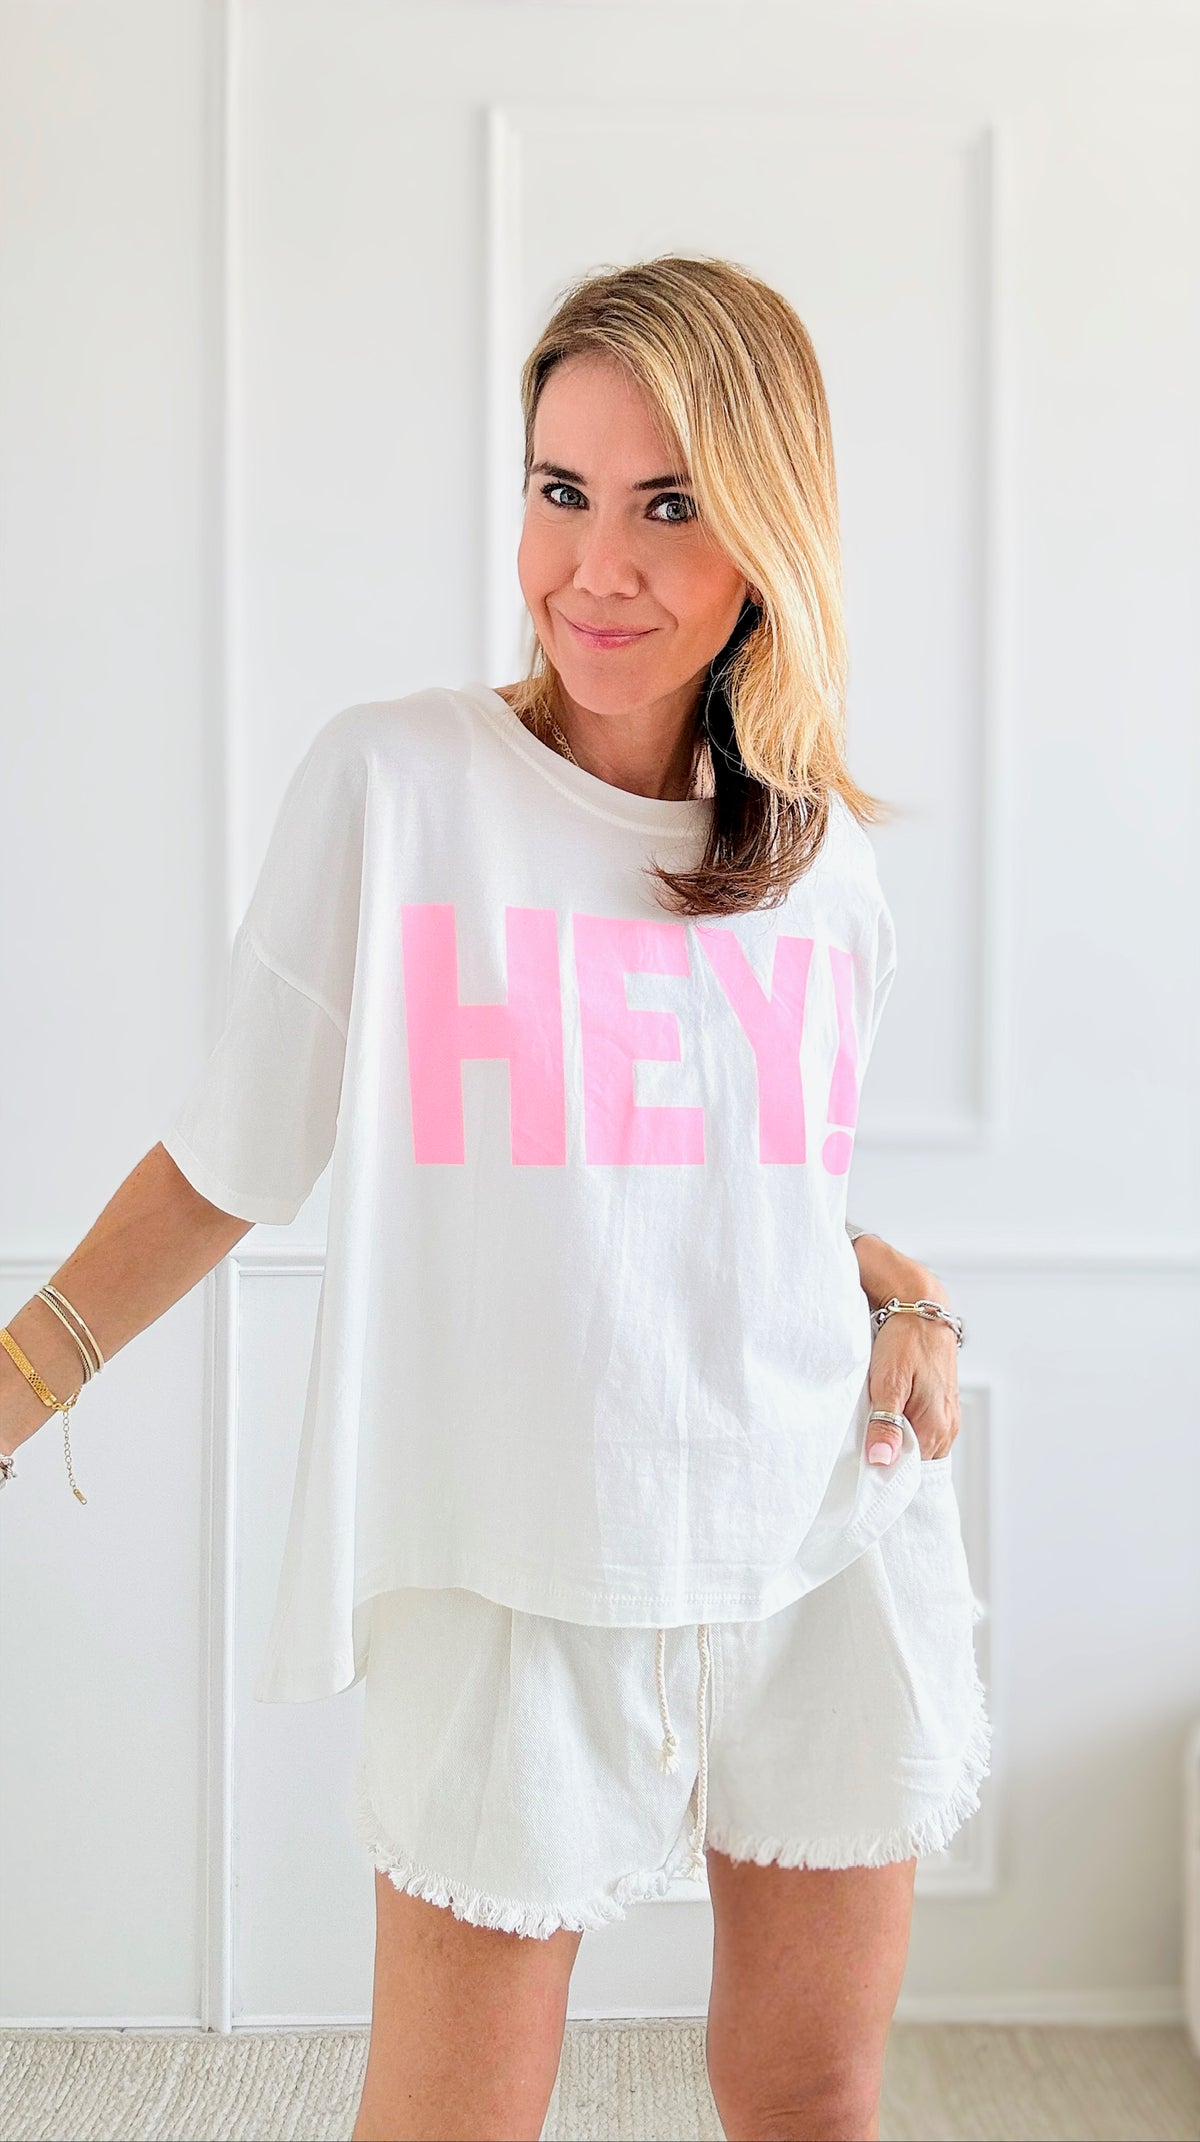 HEY! Italian Graphic Tee - White-120 Graphic-Italianissimo-Coastal Bloom Boutique, find the trendiest versions of the popular styles and looks Located in Indialantic, FL